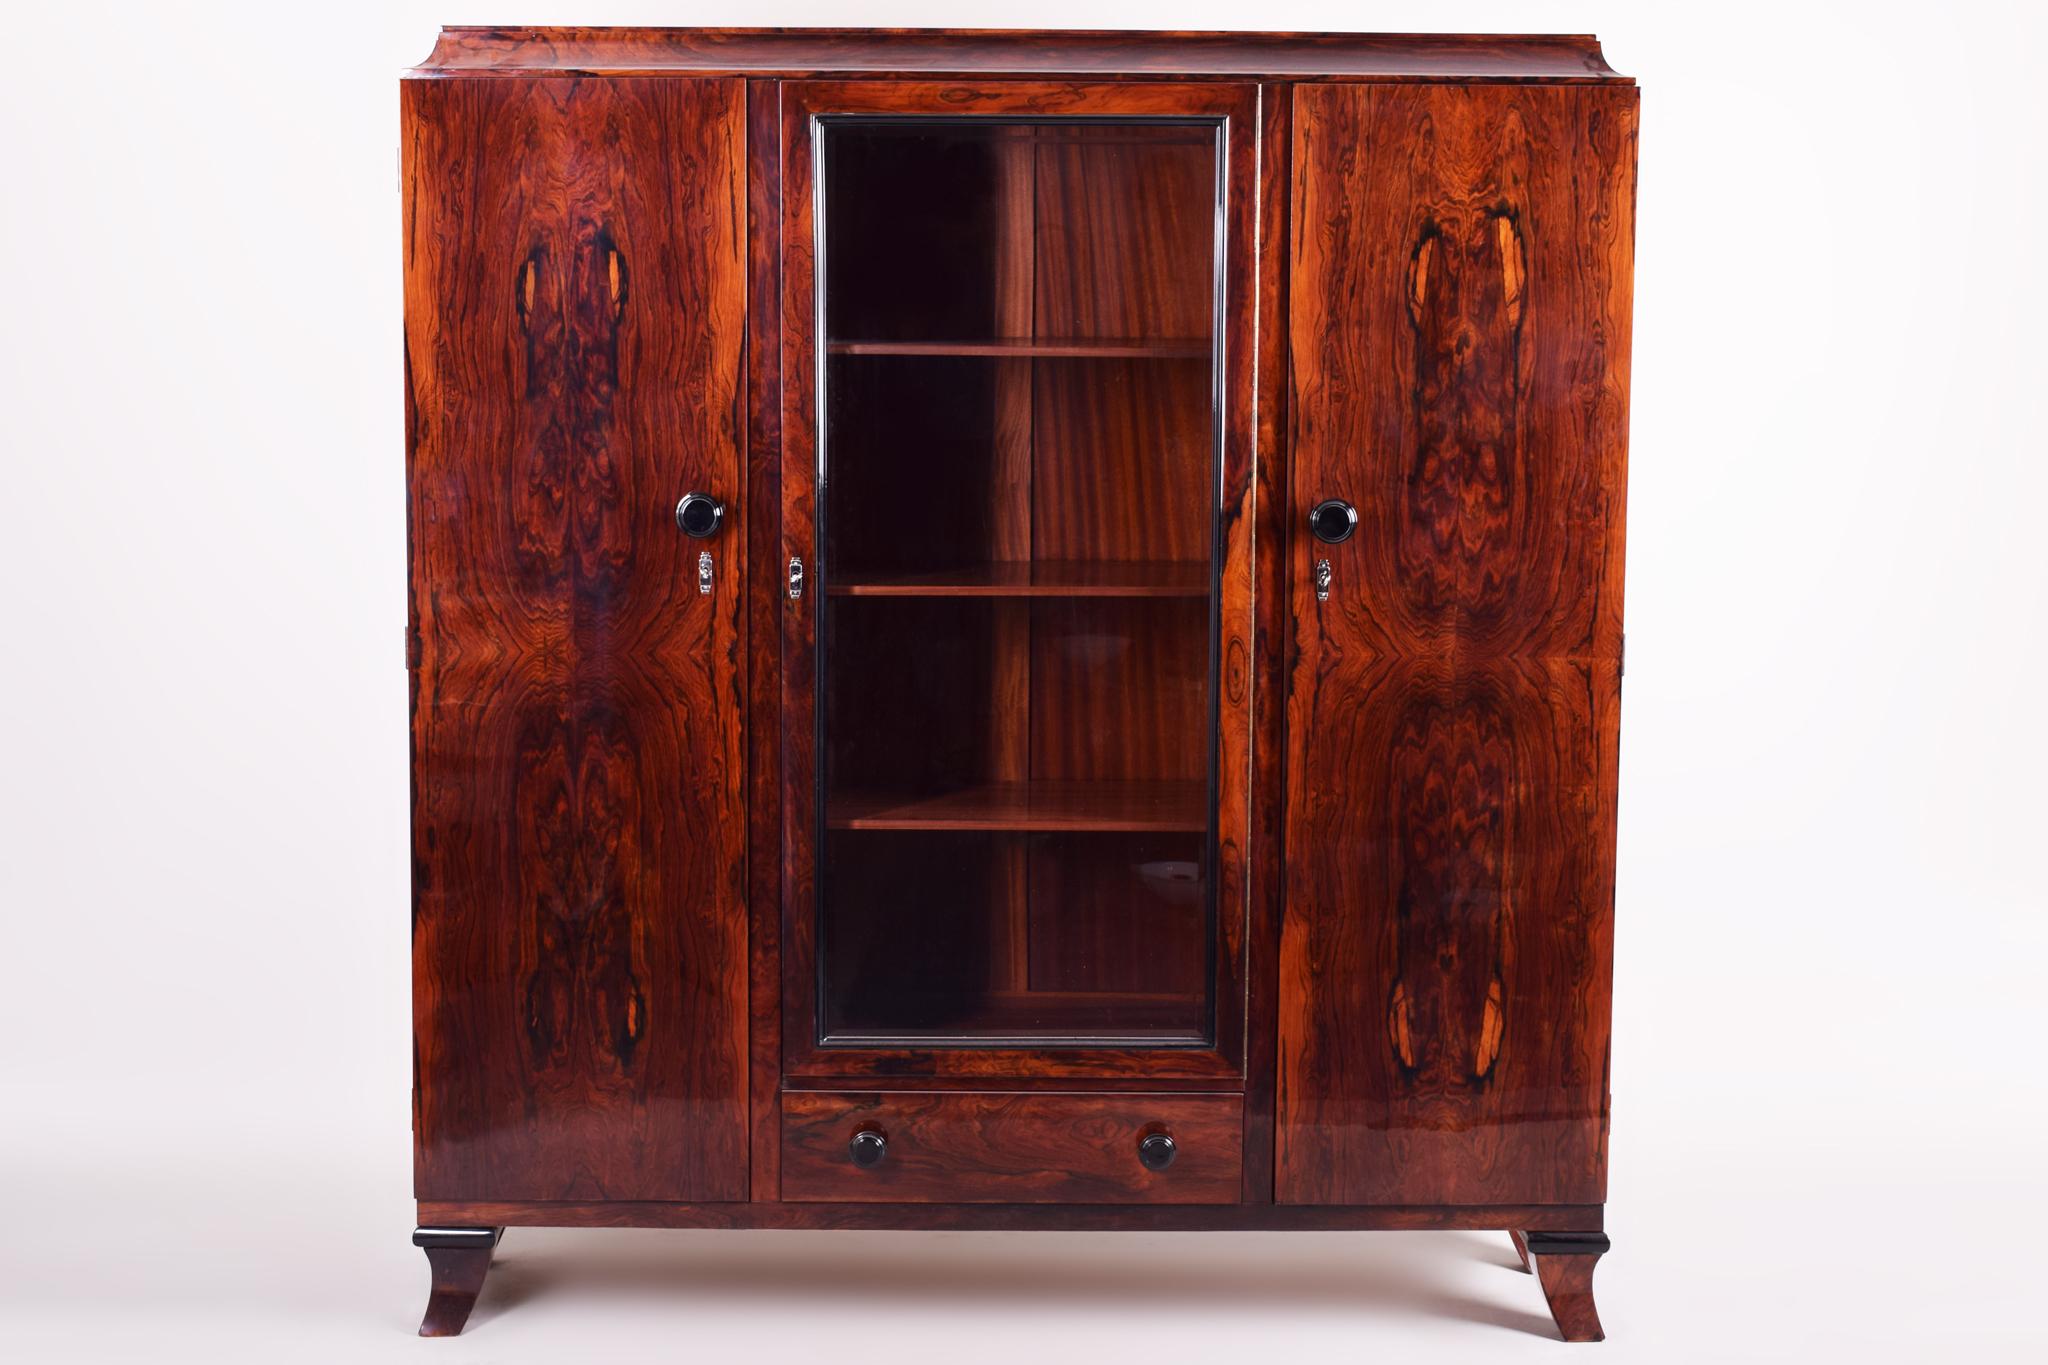 20th century Art Deco display cabinet.
Completely restored to the high gloss.
Material: Rosewood, Cocobolo.
Designed in France by Jules Leleu.